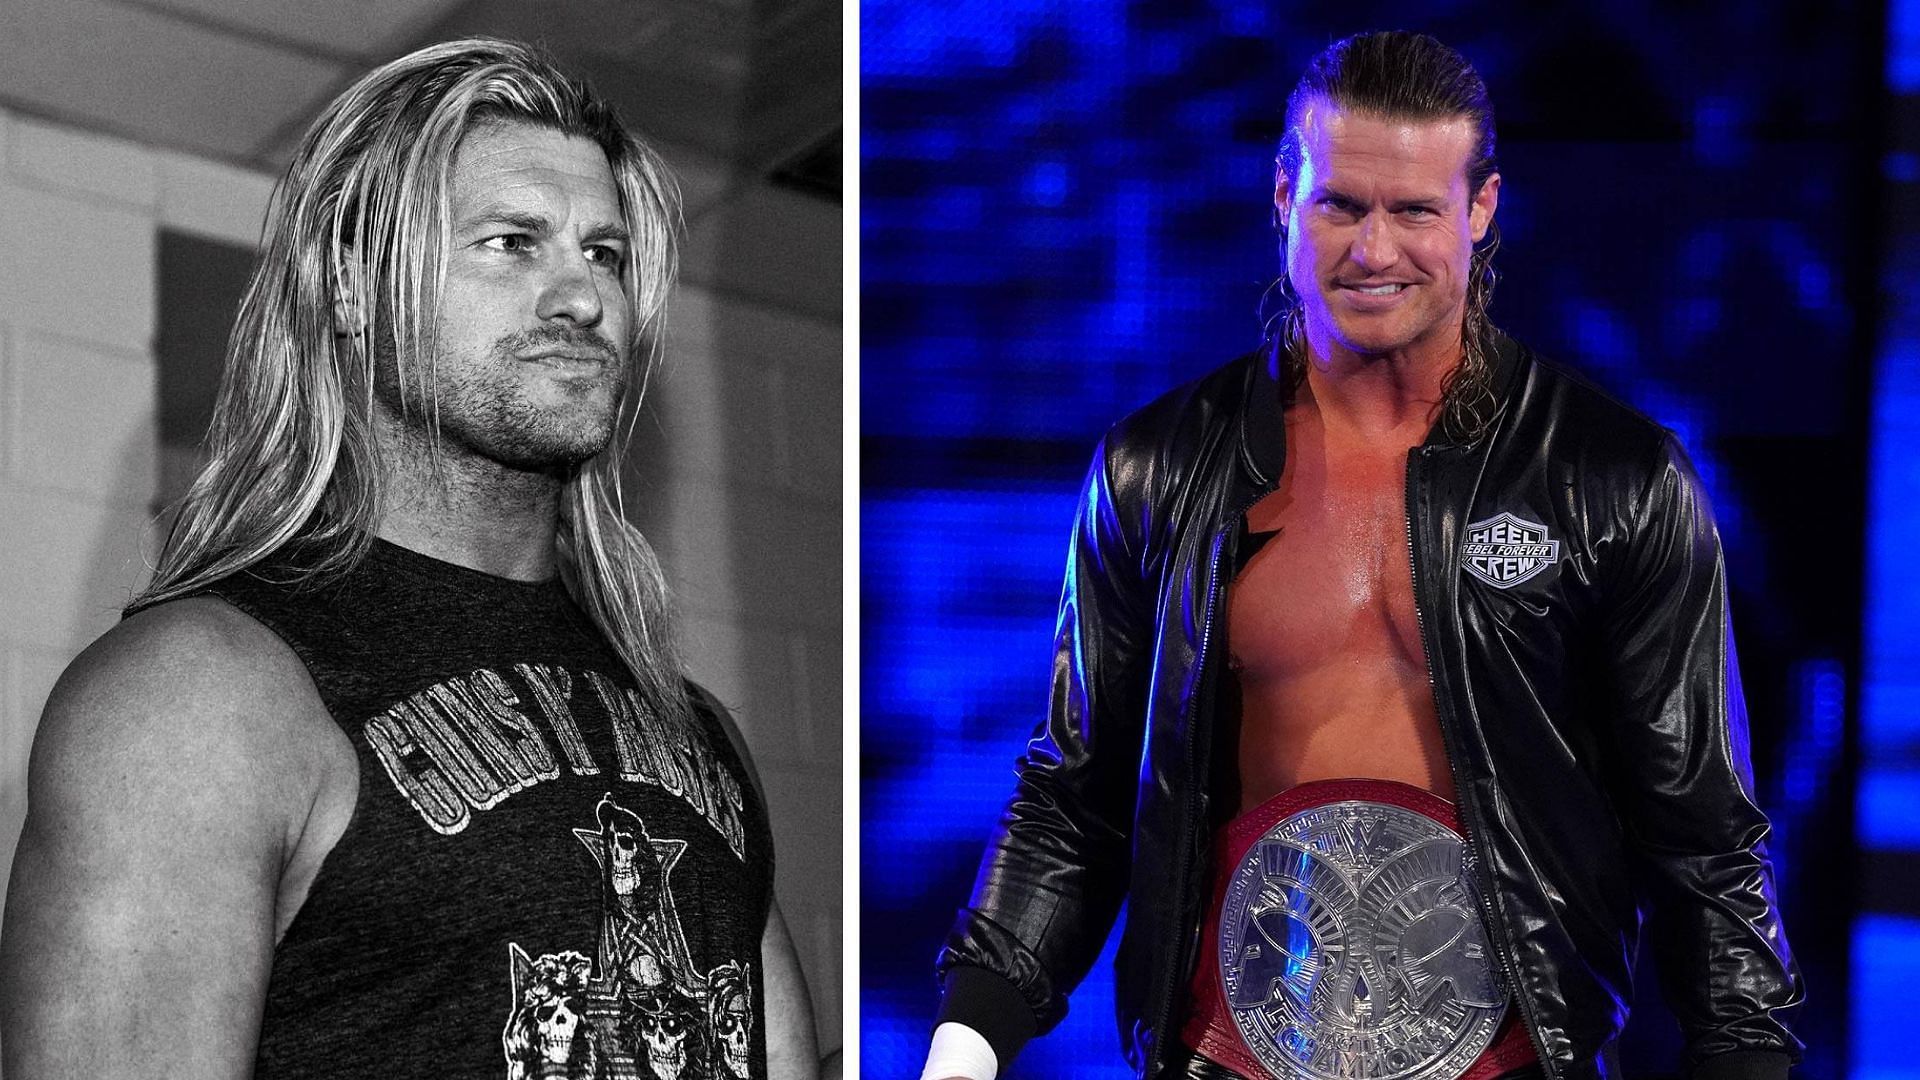 Dolph Ziggler is currently on the WWE RAW roster.